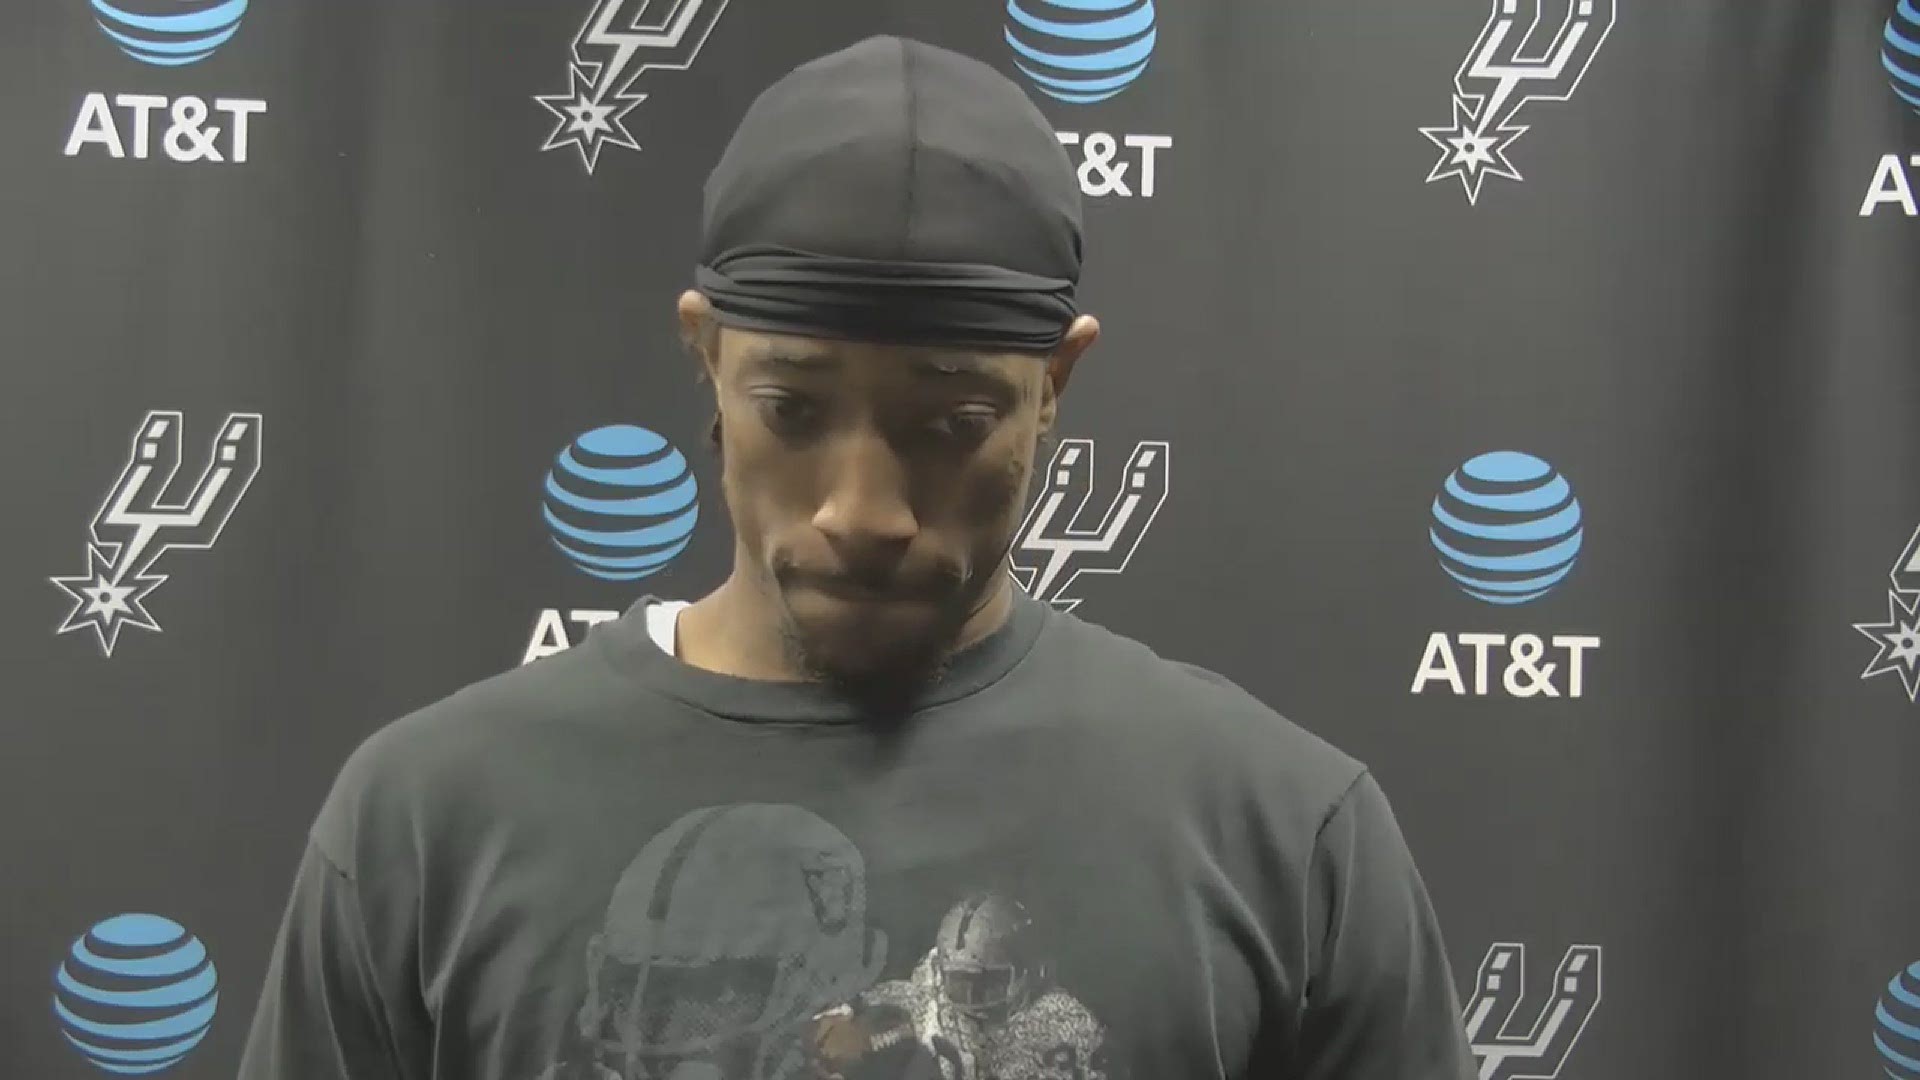 DeRozan said the Spurs never found a rhythm, and never found a way to break the rhythm that Memphis had.